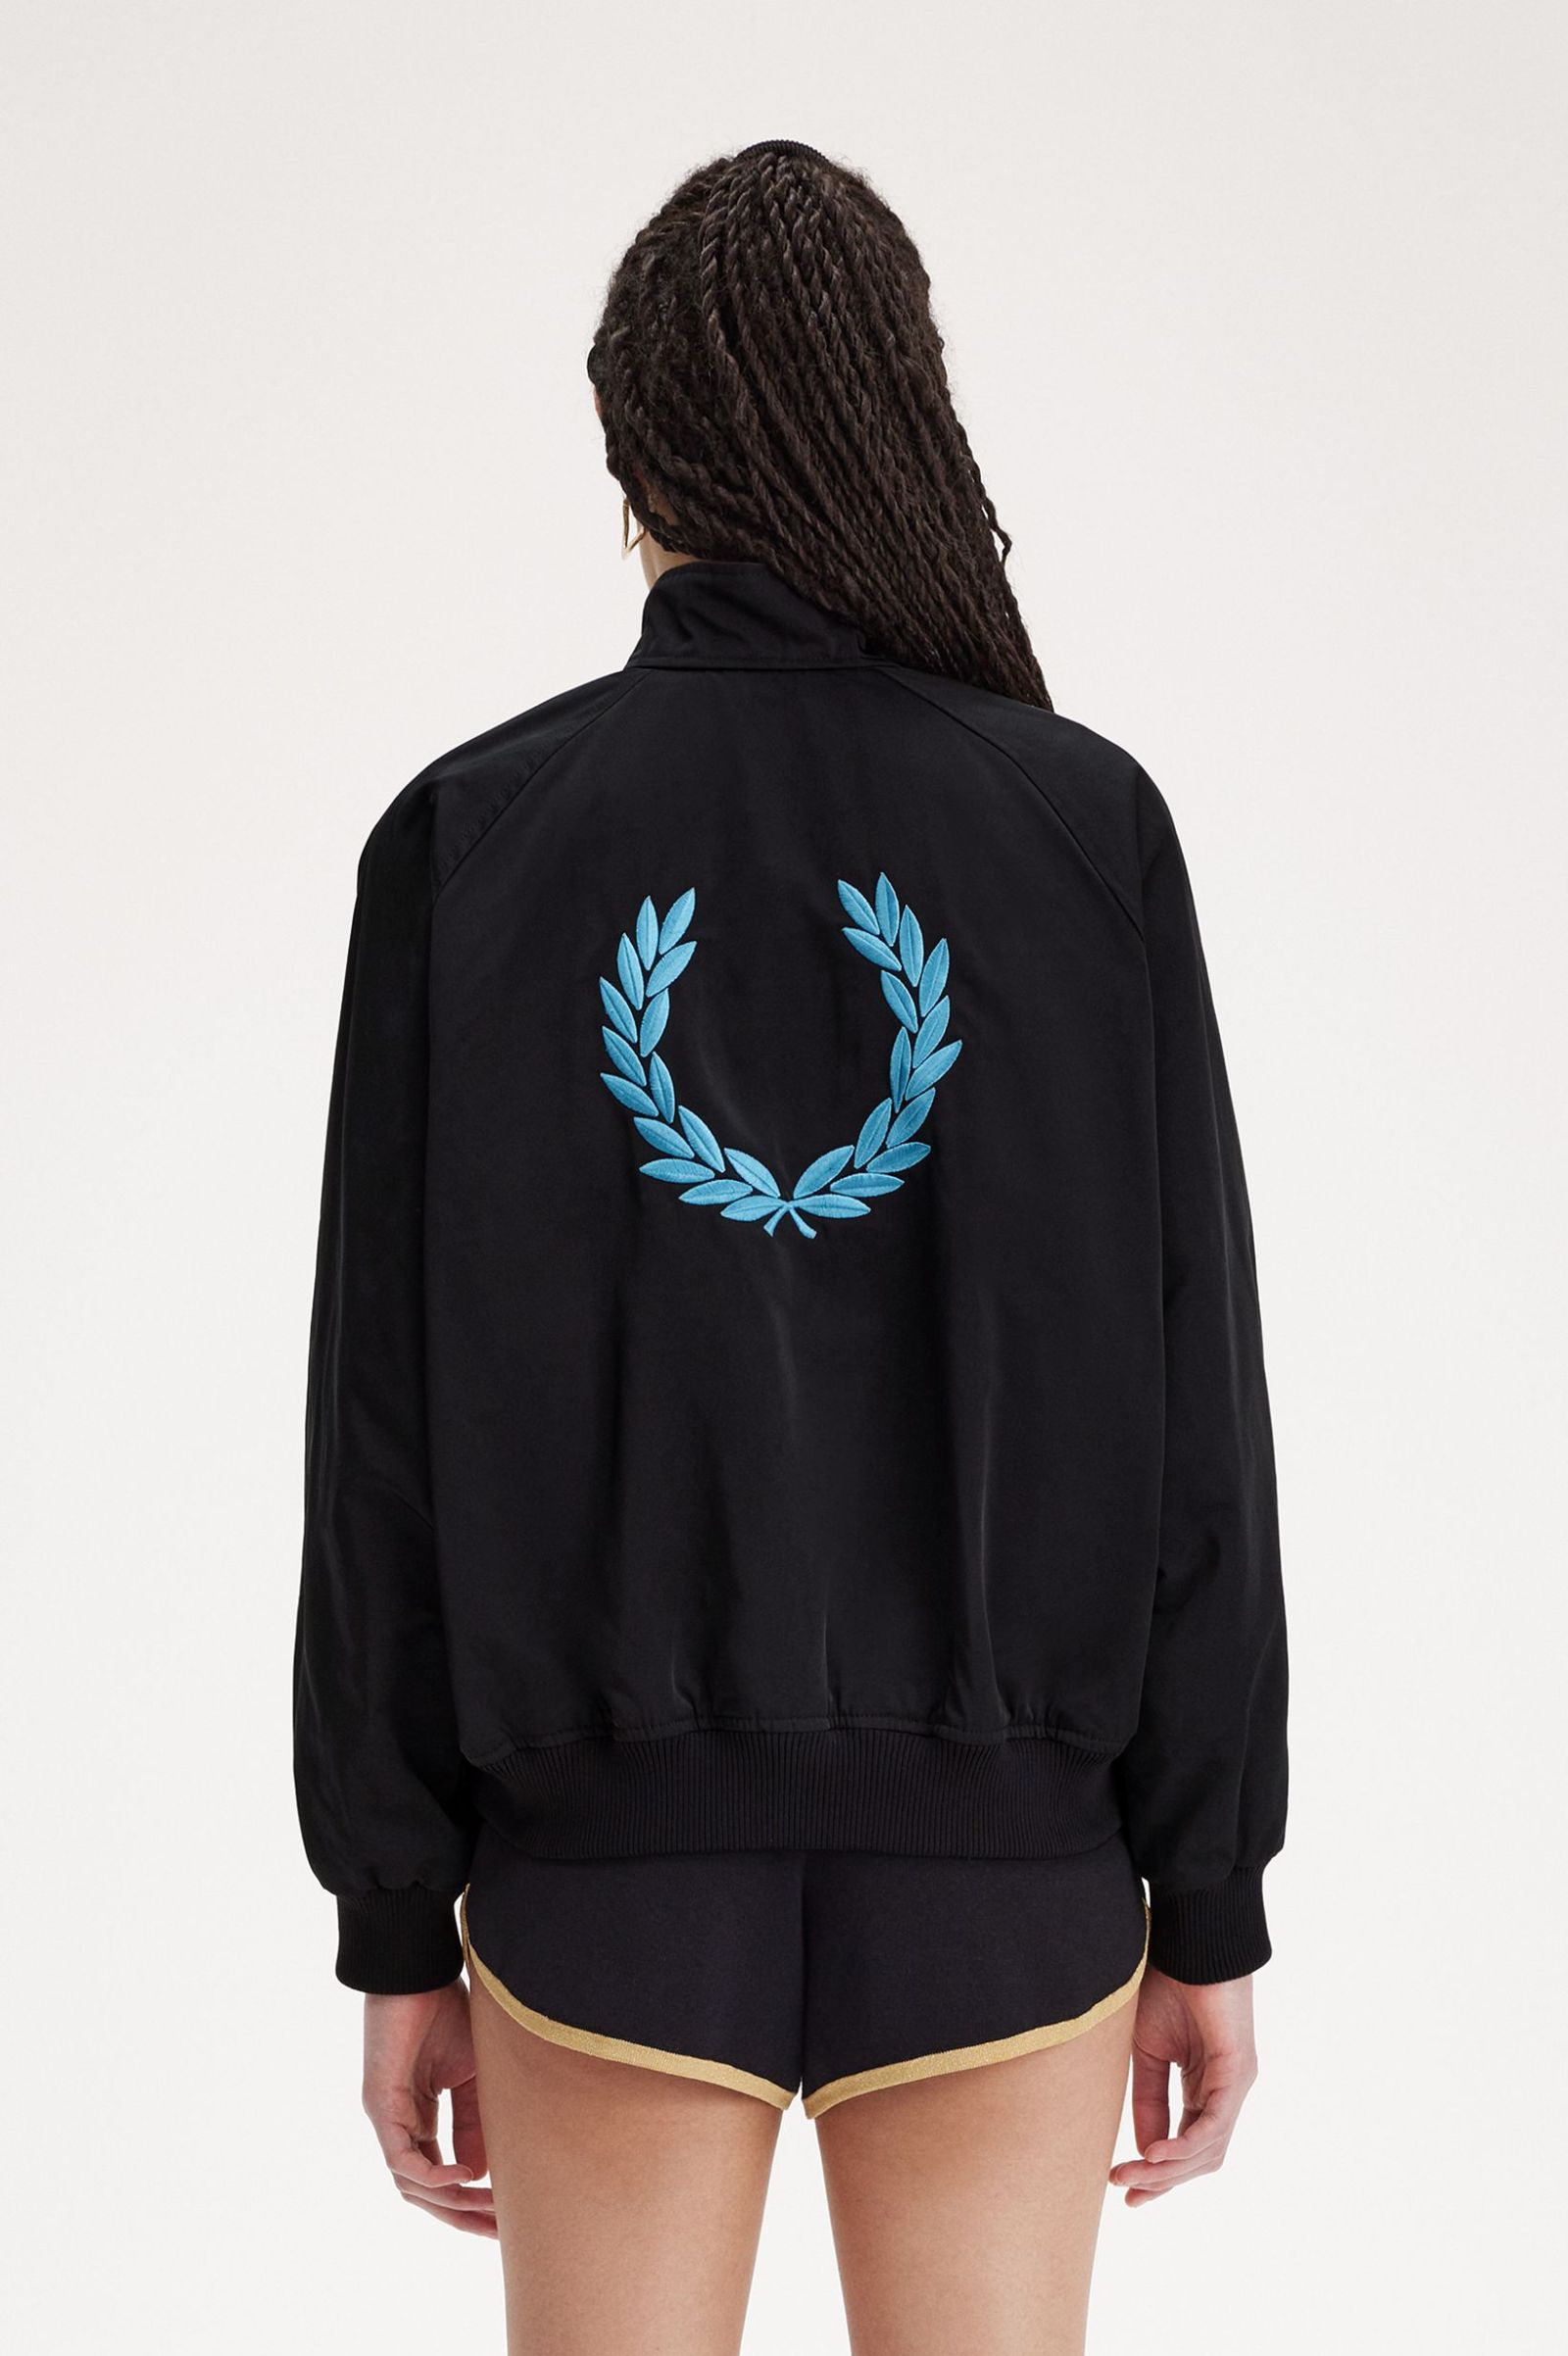 Fred Perry Amy Winehouse Laurel Wreath Zip-Through Jacket in Black 